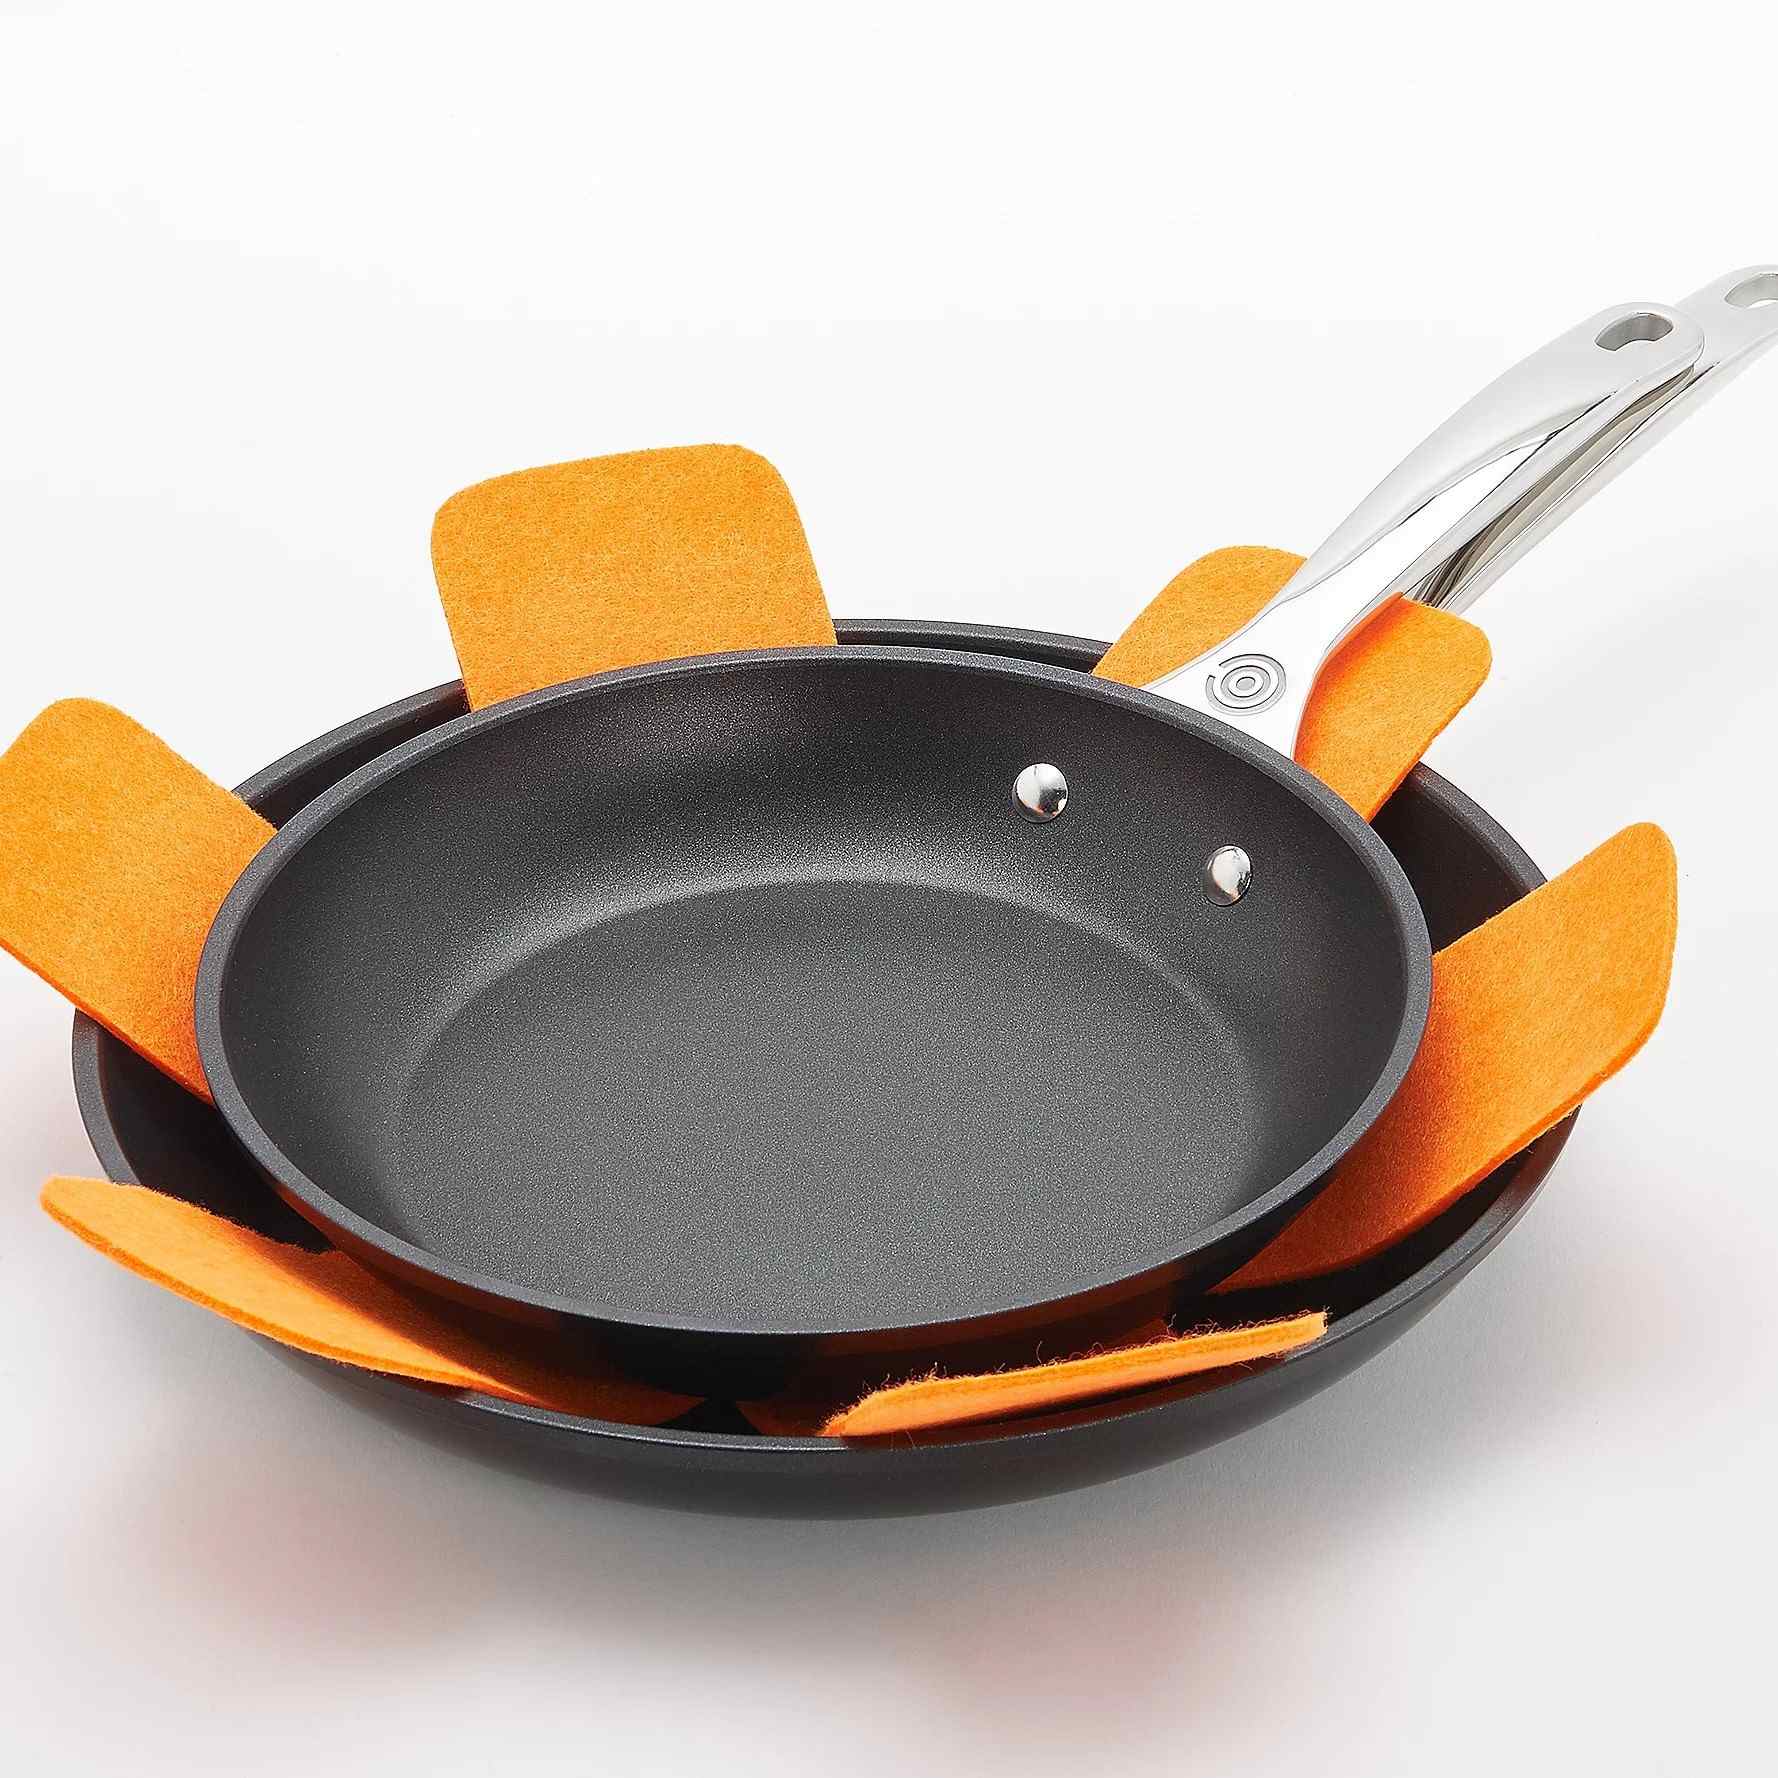 12 Best QVC Kitchenware Products 8 